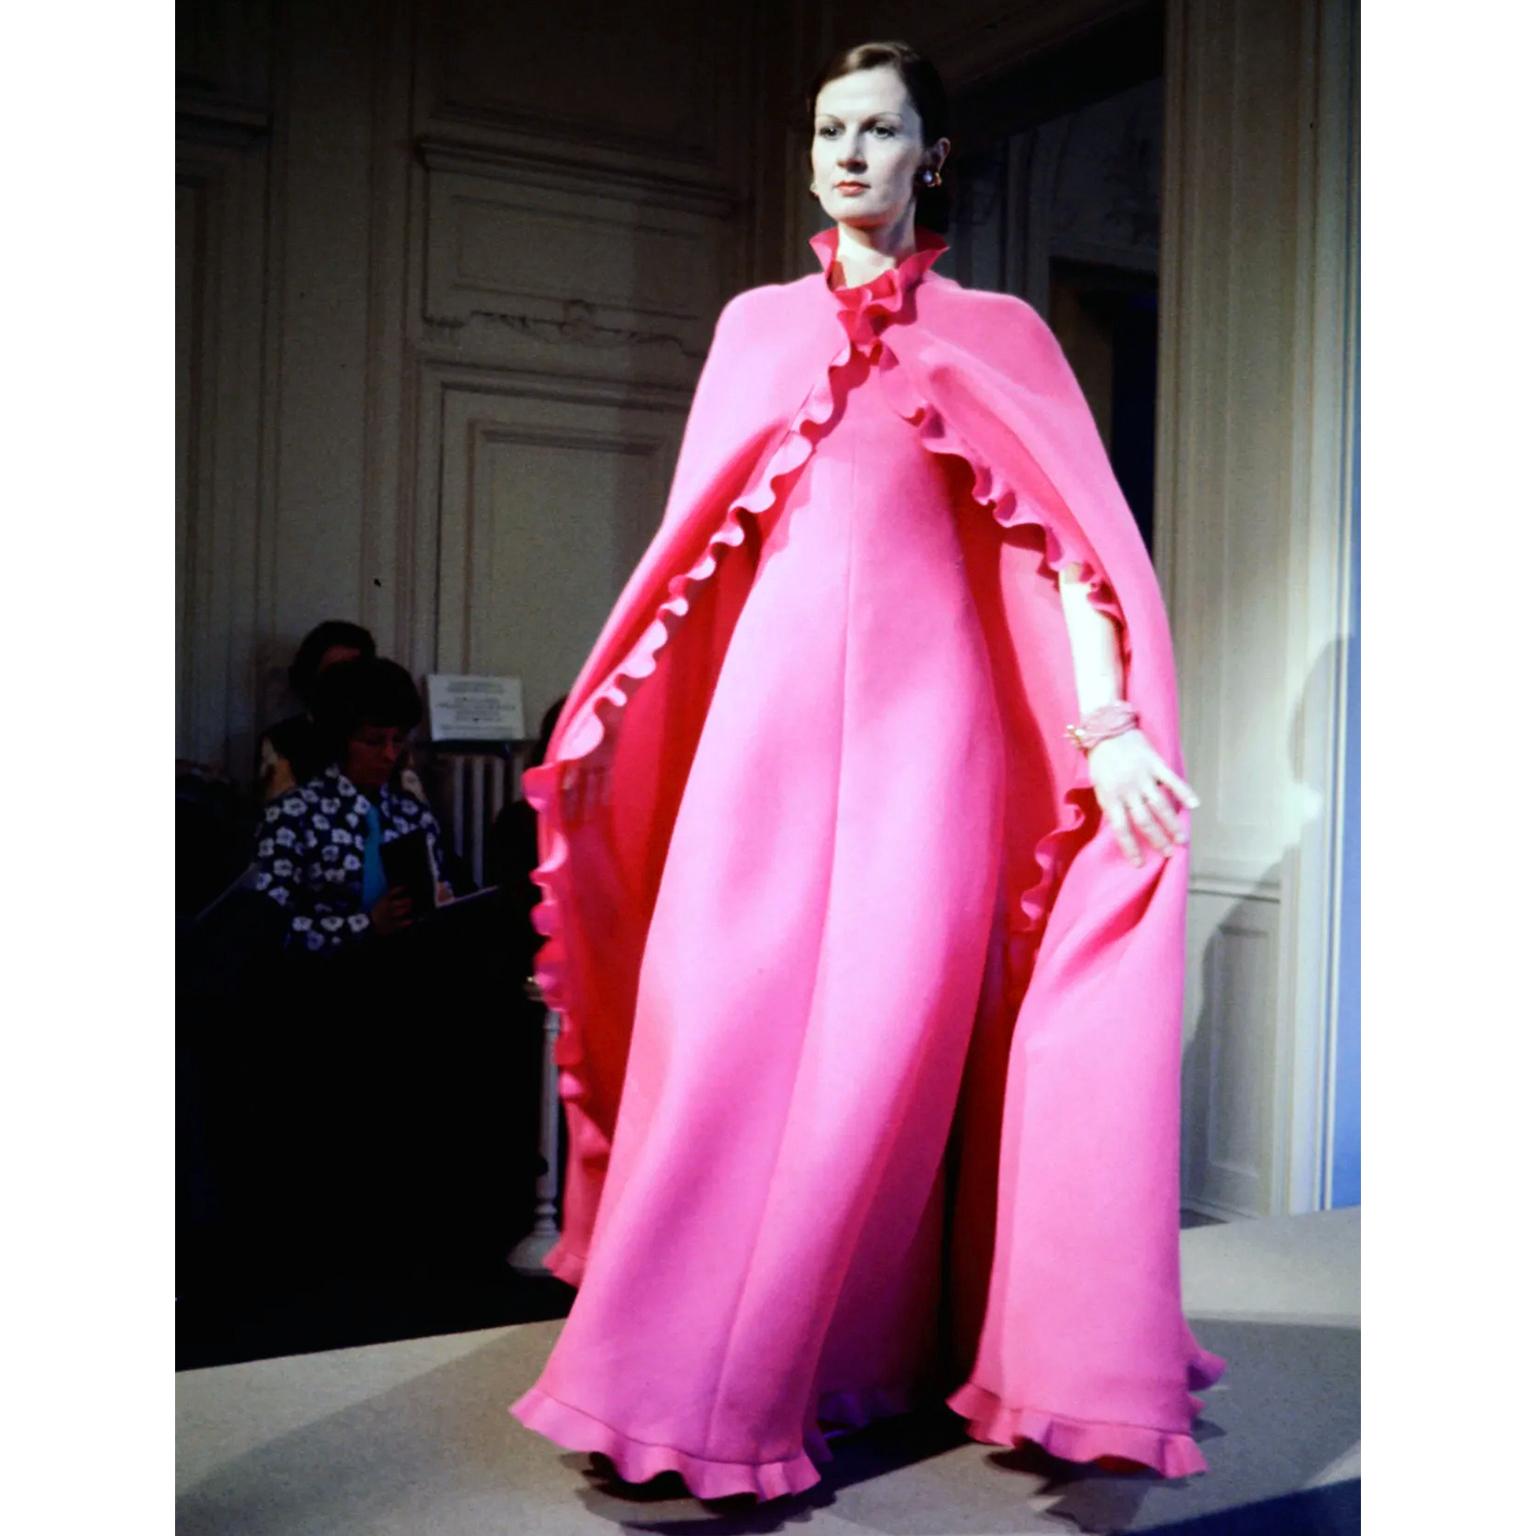 1971 Christian Dior Haute Couture Pink Ruffled Runway Evening Dress Grace Kelly  10